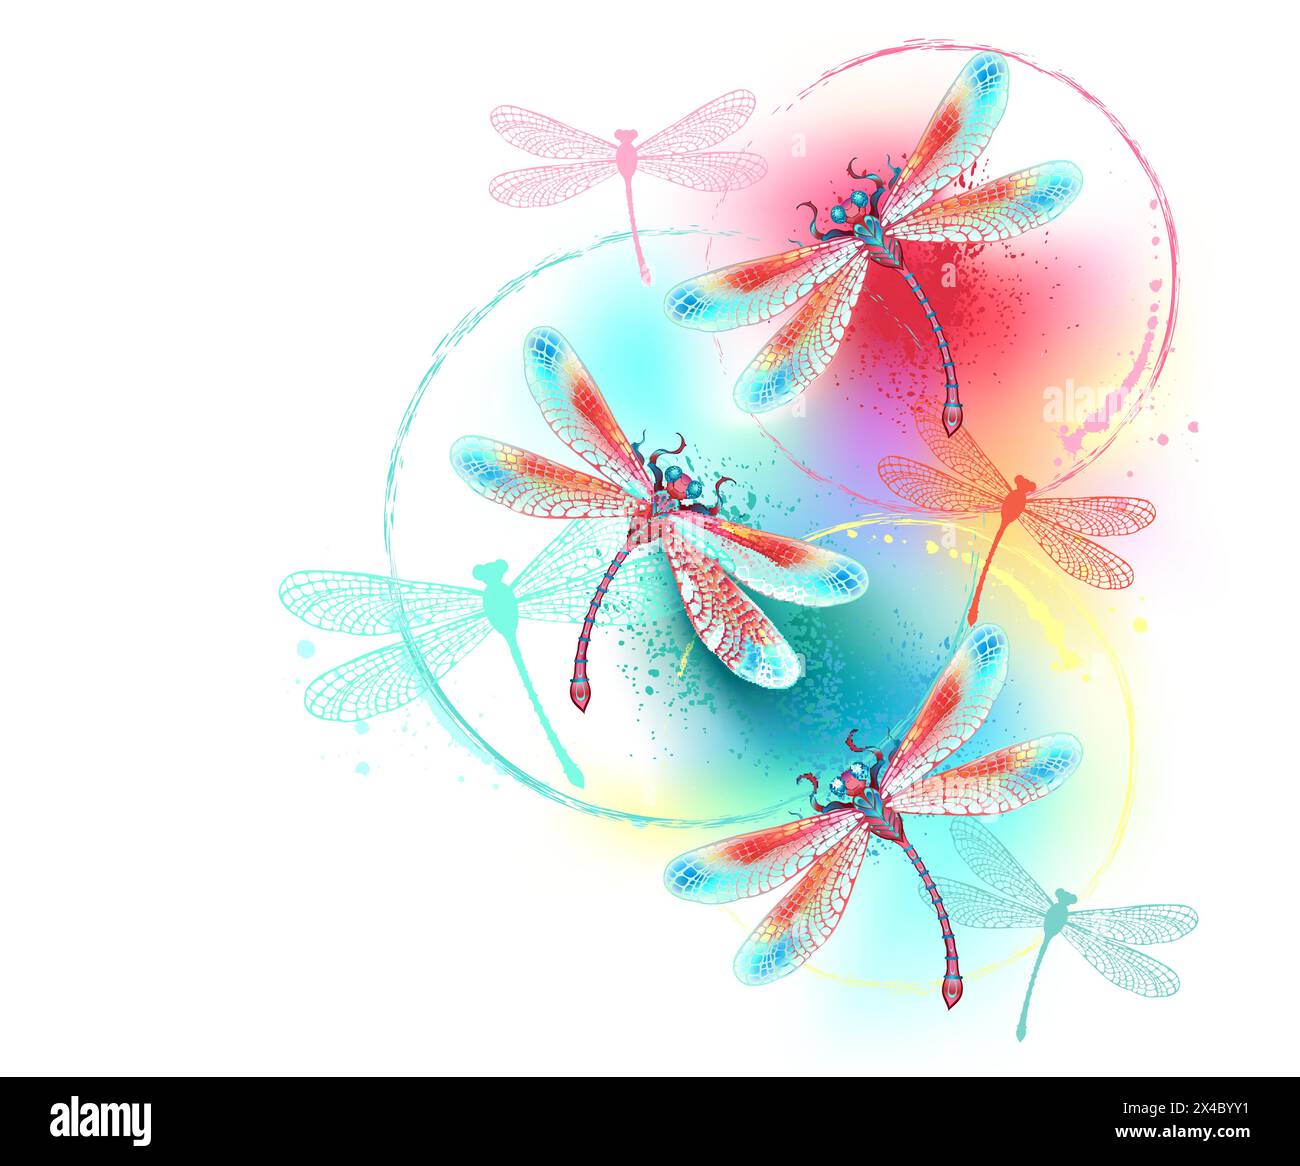 Swarm of red, artistically drawn, detailed dragonflies on background painted over with red, blue and green watercolor paint. Red dragonfly. Summer des Stock Vector